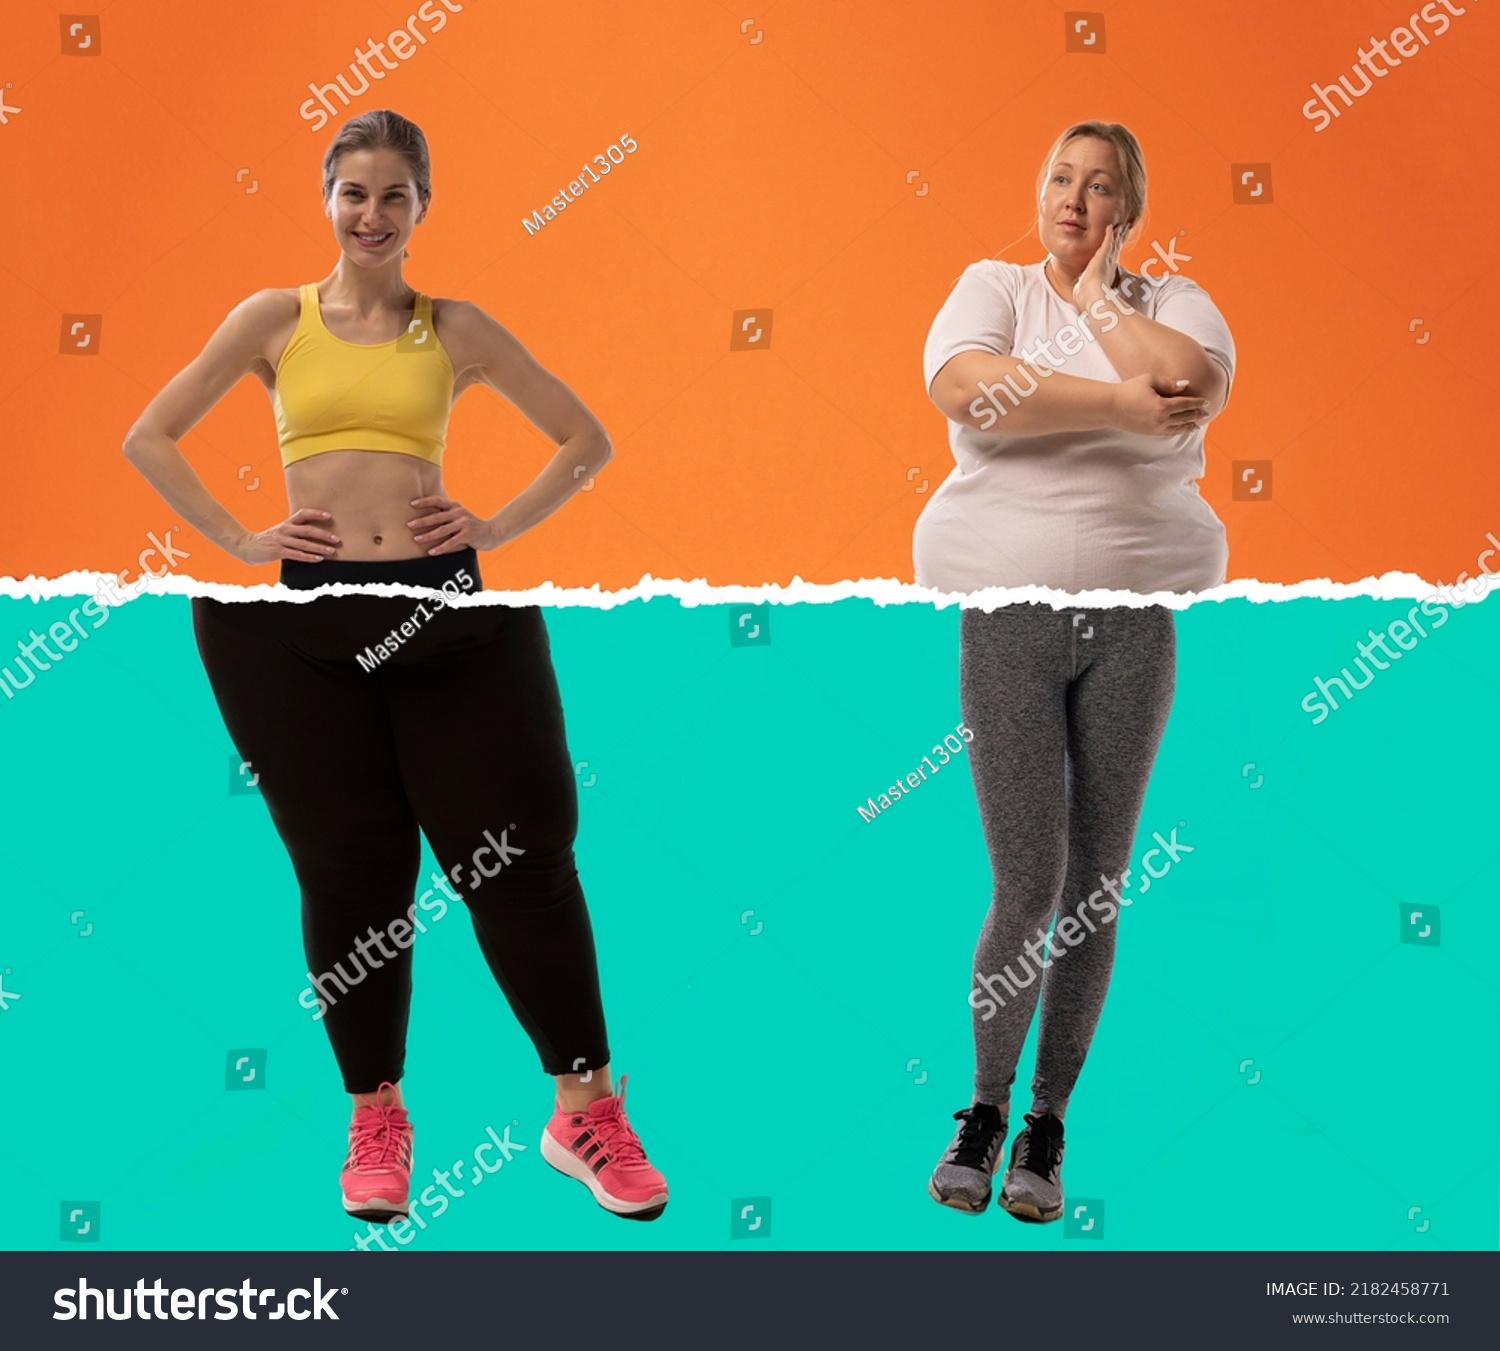 Comparison and contrast. Creative artcollage with young slim girl and plus-size woman wearing sport uniform isolated on green orange background. Concept of healthy lifestyle, fitness, sport, nutrition #2182458771